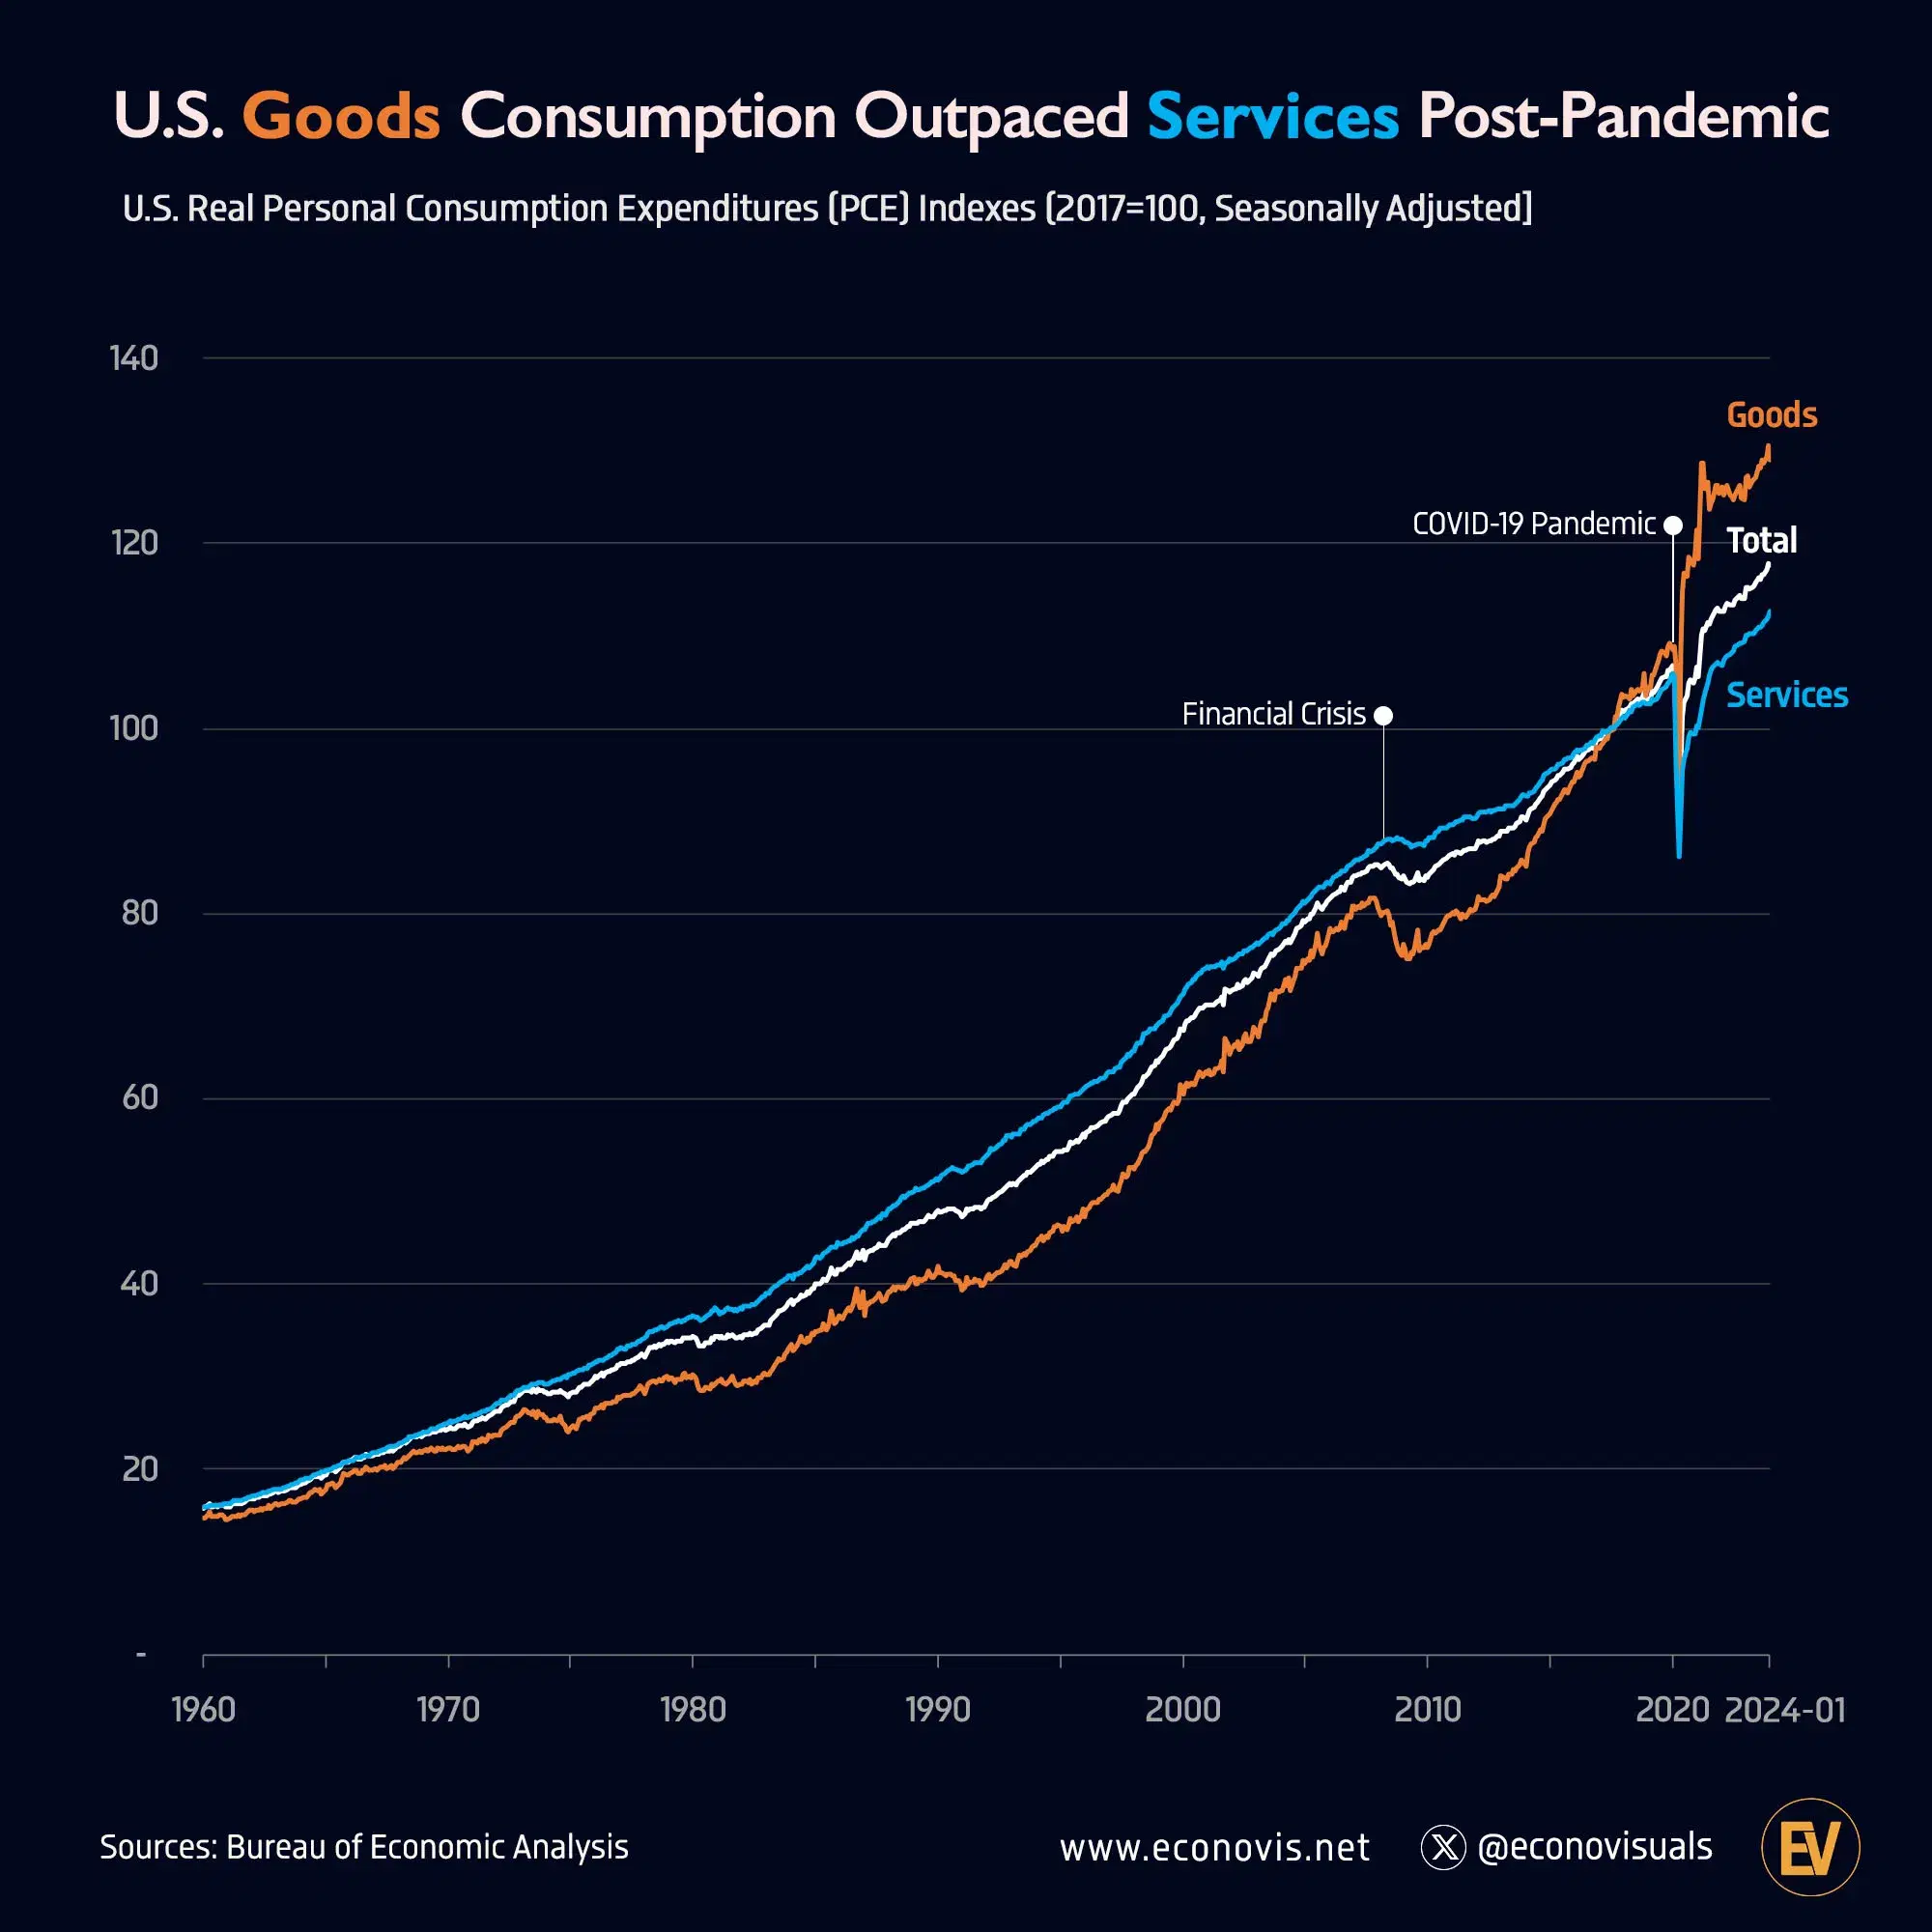 U.S. Goods Consumption Outpaced Services Post-Pandemic